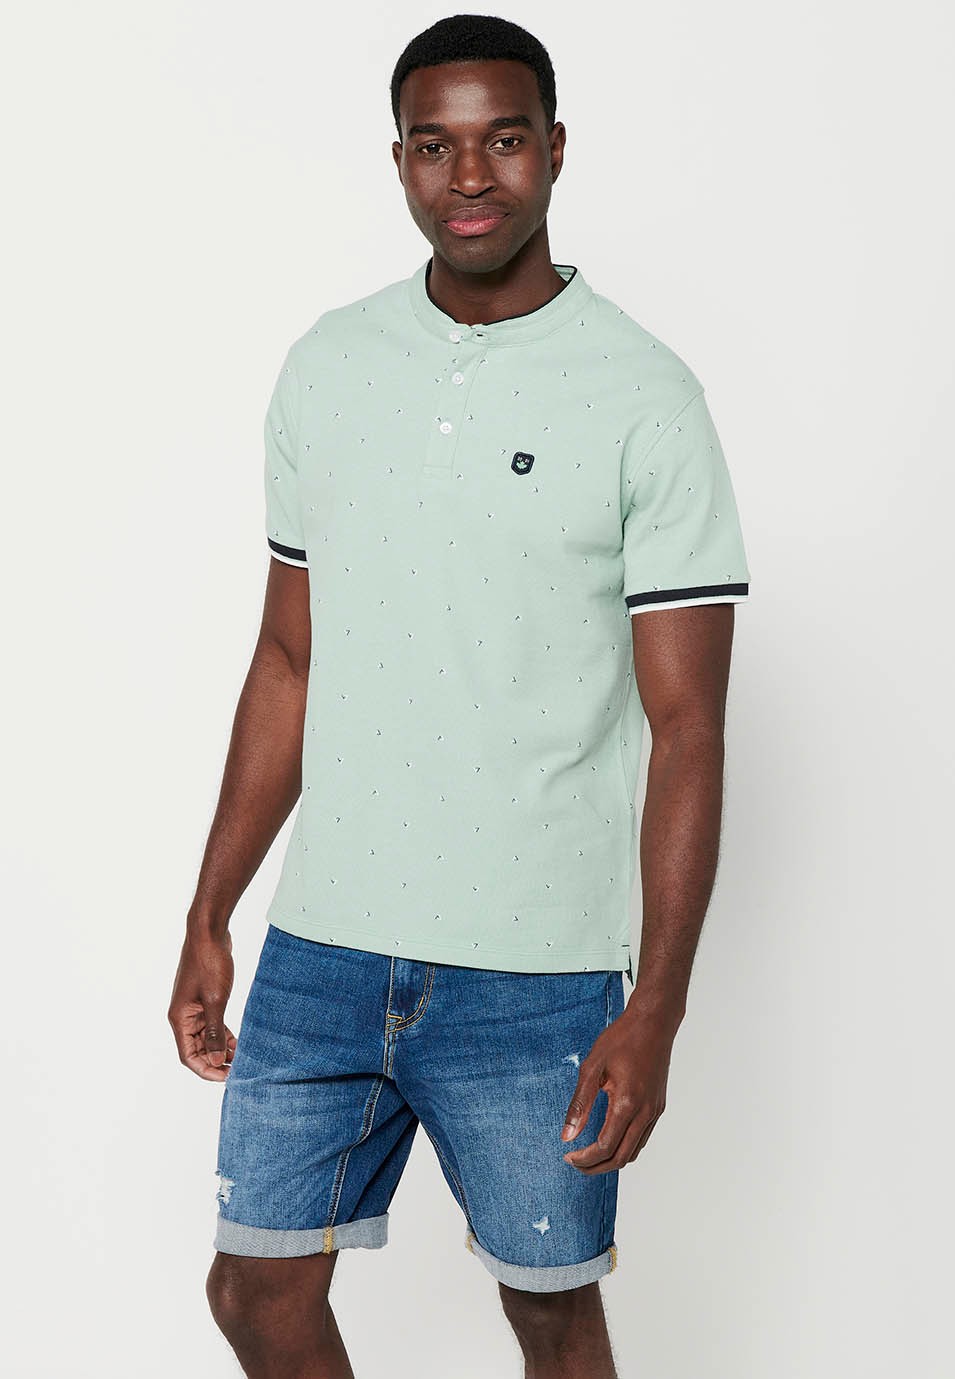 Short-sleeved Cotton Polo Shirt with Round Neck with Buttoned Opening and Finished with Khaki Side Cuts for Men